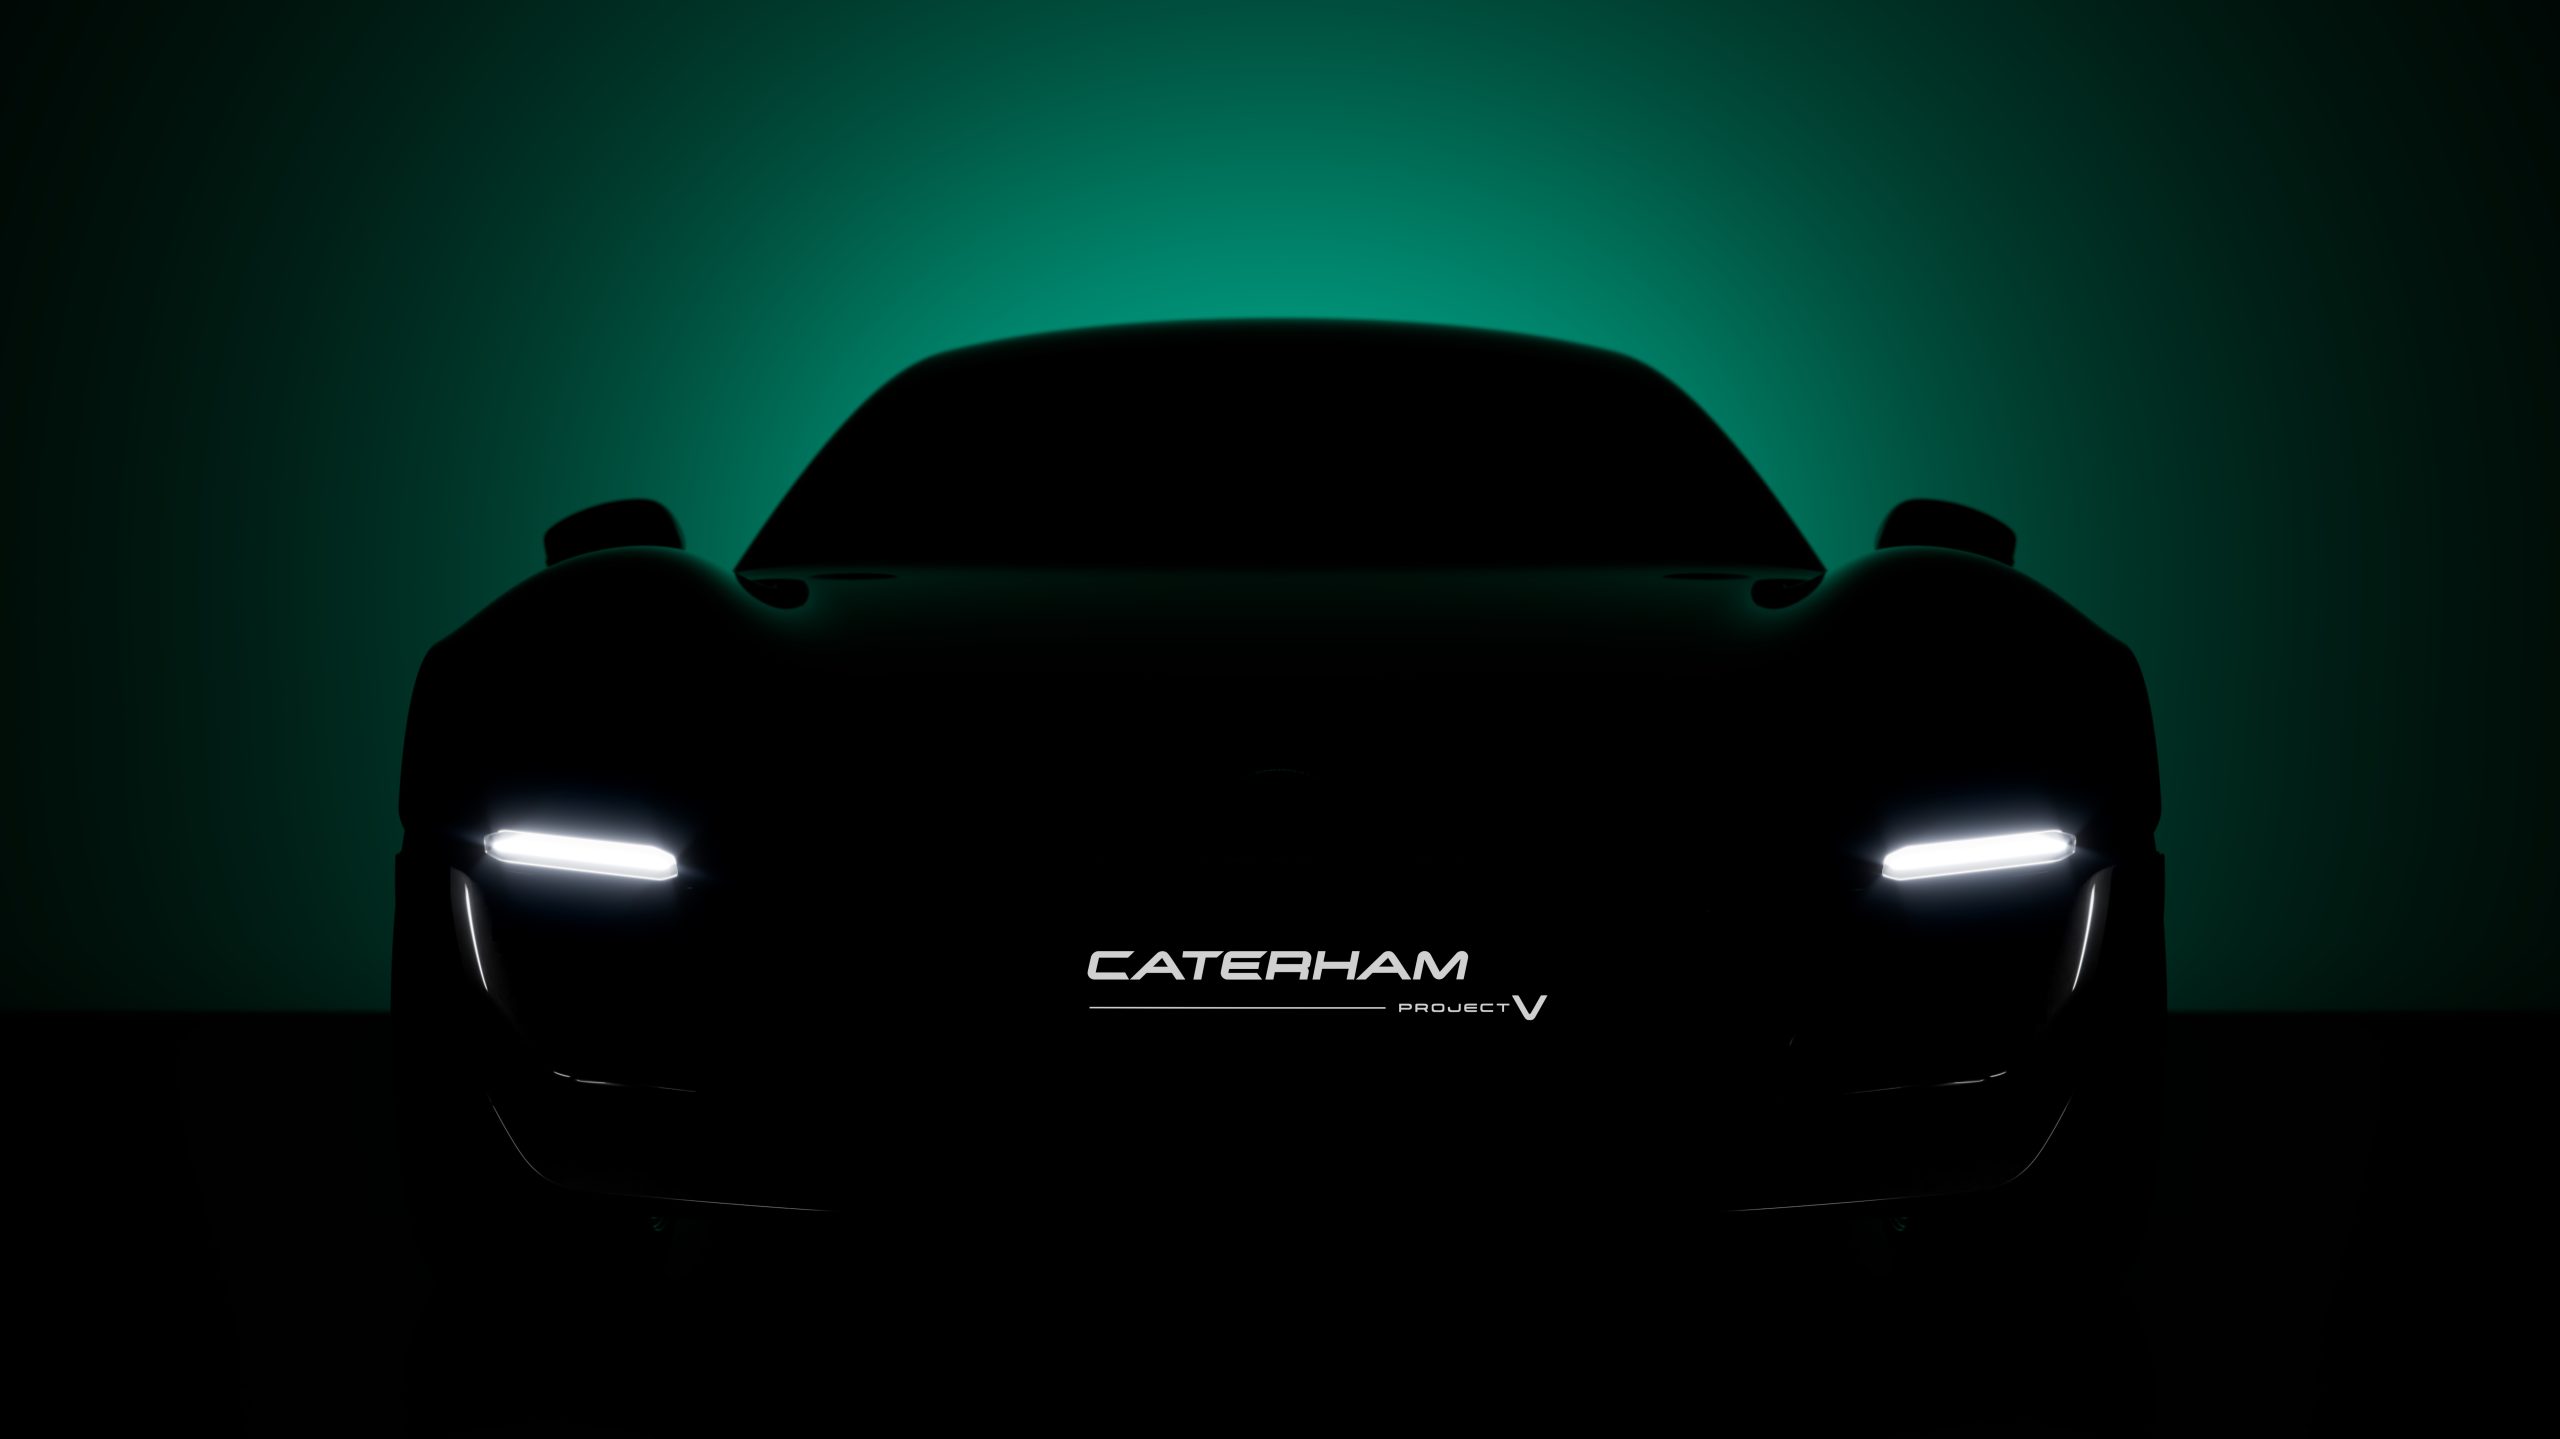 Caterham's electric future arrives in July